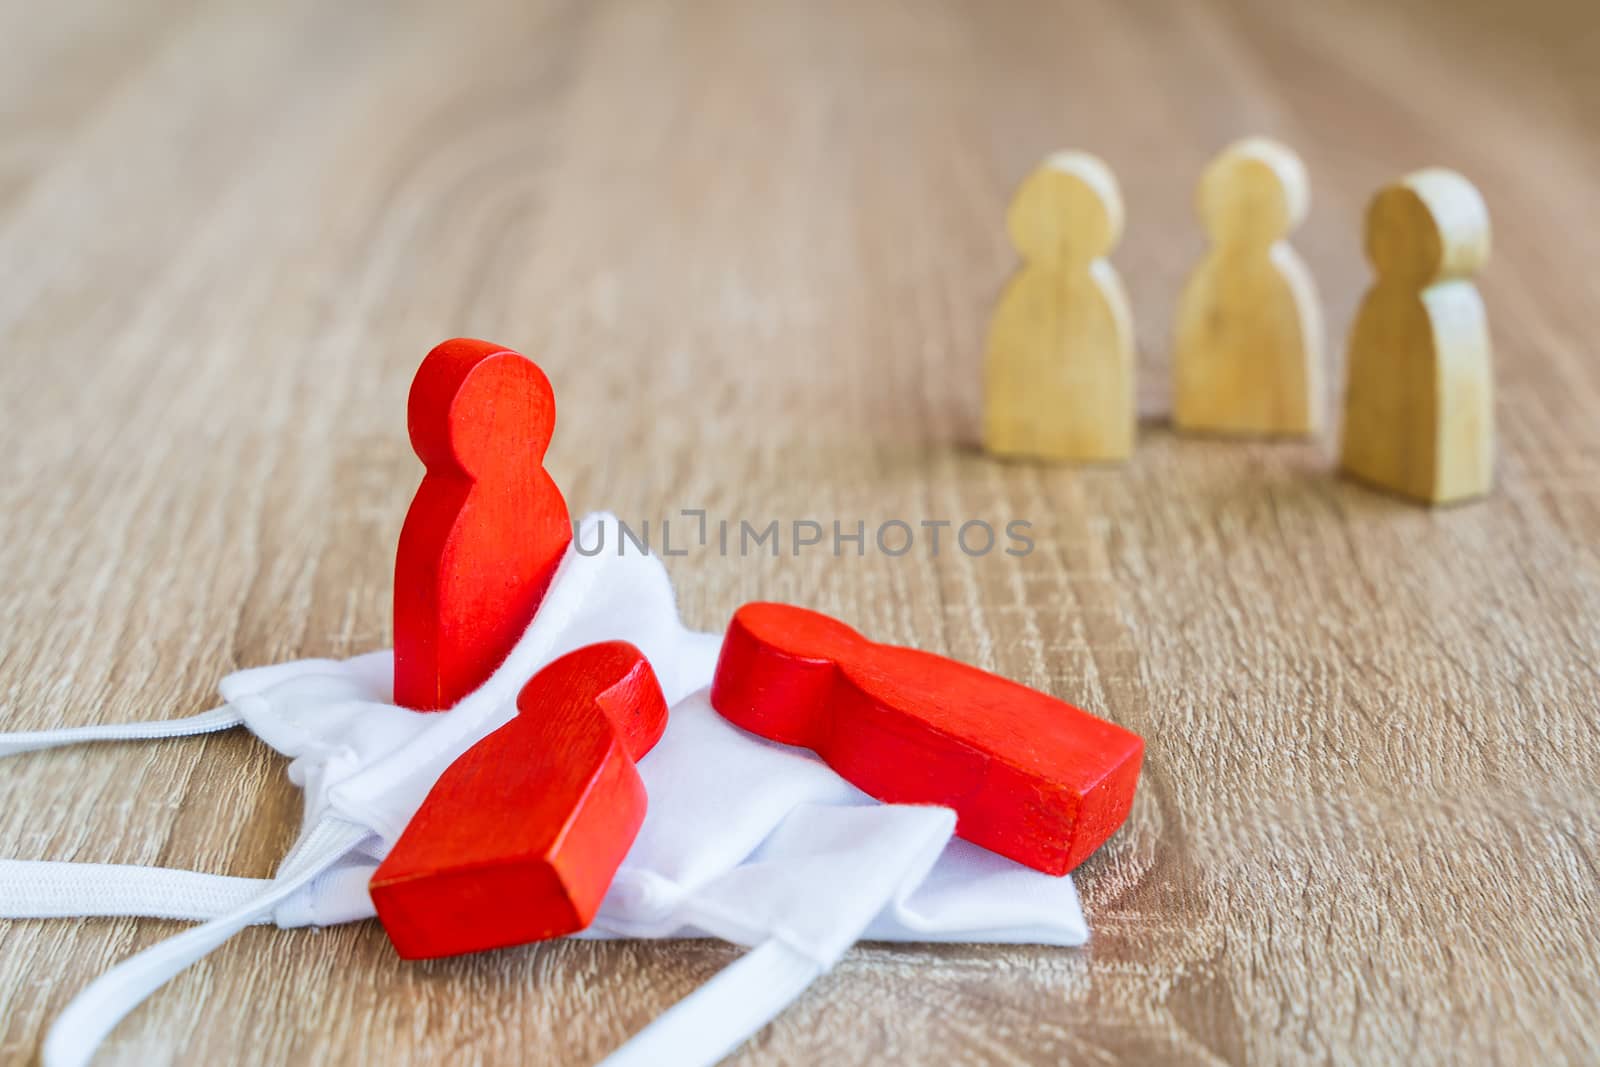 Social distancing during the Corona virus outbreak, red wooden Figure were infected in hygienic masks such as 
quarantine Exclude from people who are not infected to prevent increased outbreaks